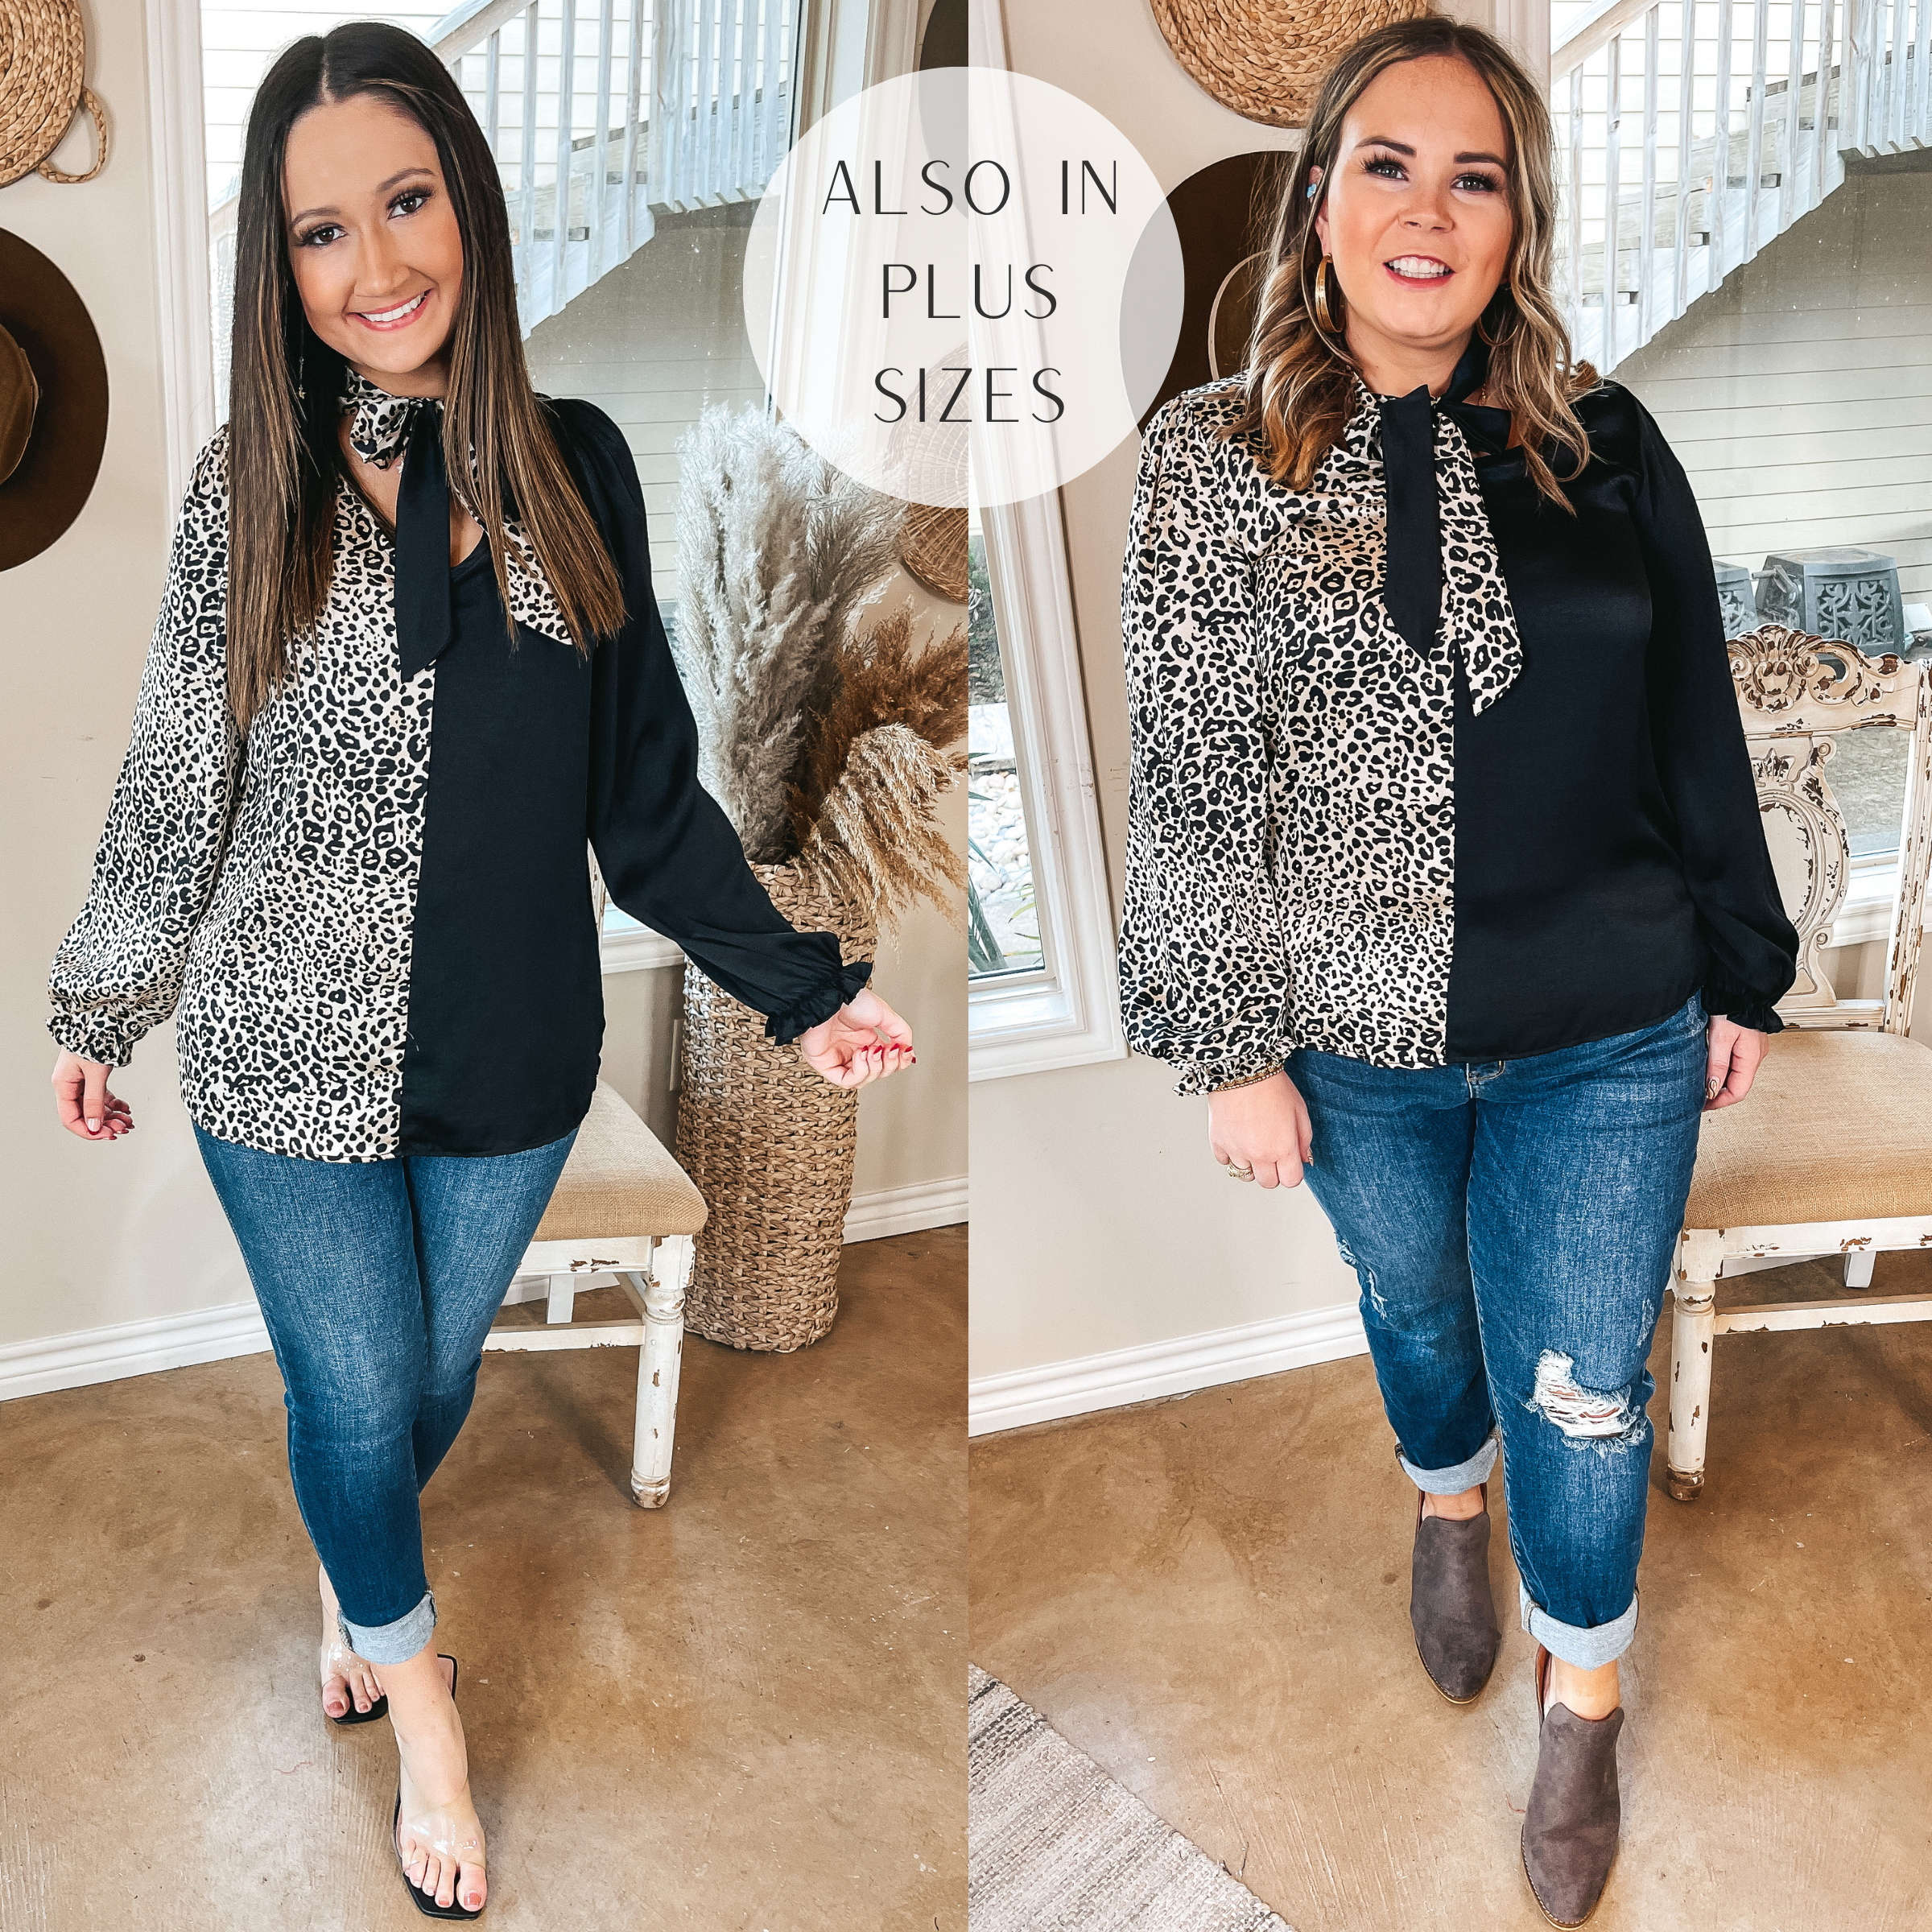 Models are wearing a blouse that is half solid black and half ivory leopard print. The blouse has a keyhole front with a tie neck. Size small model has it paired with black heels and gold jewelry. Size large model has it paired with taupe booties and gold jewelry.